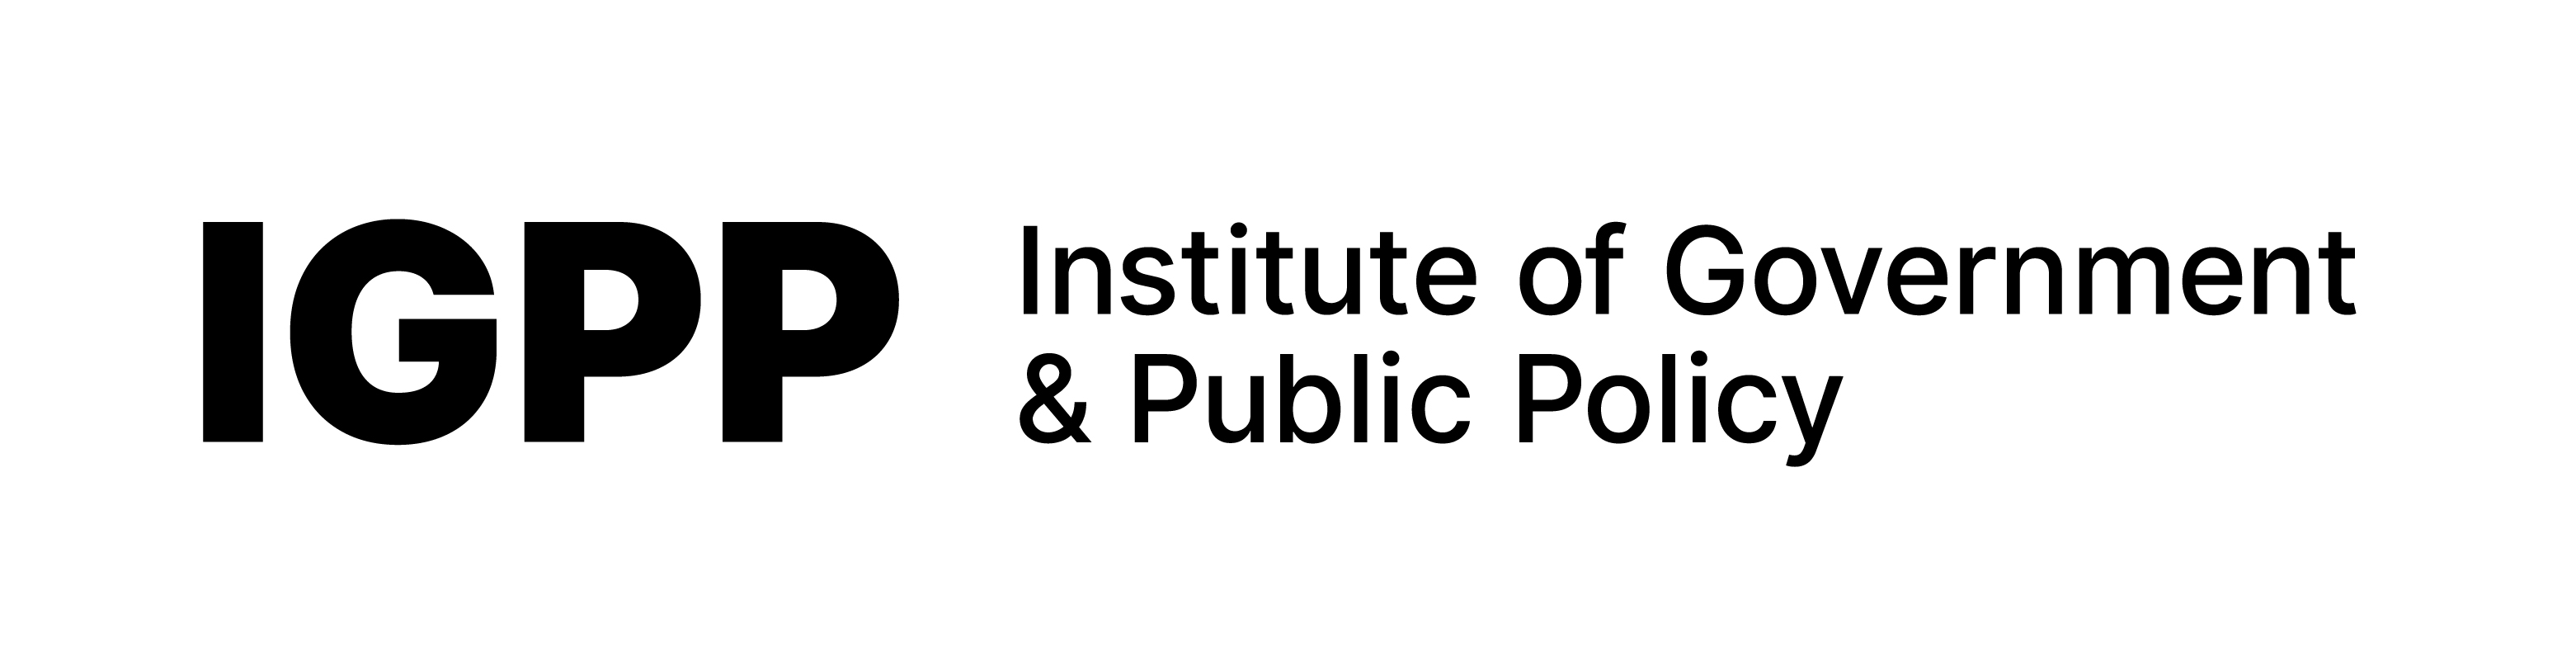 logo for The Institute of Government and Public Policy